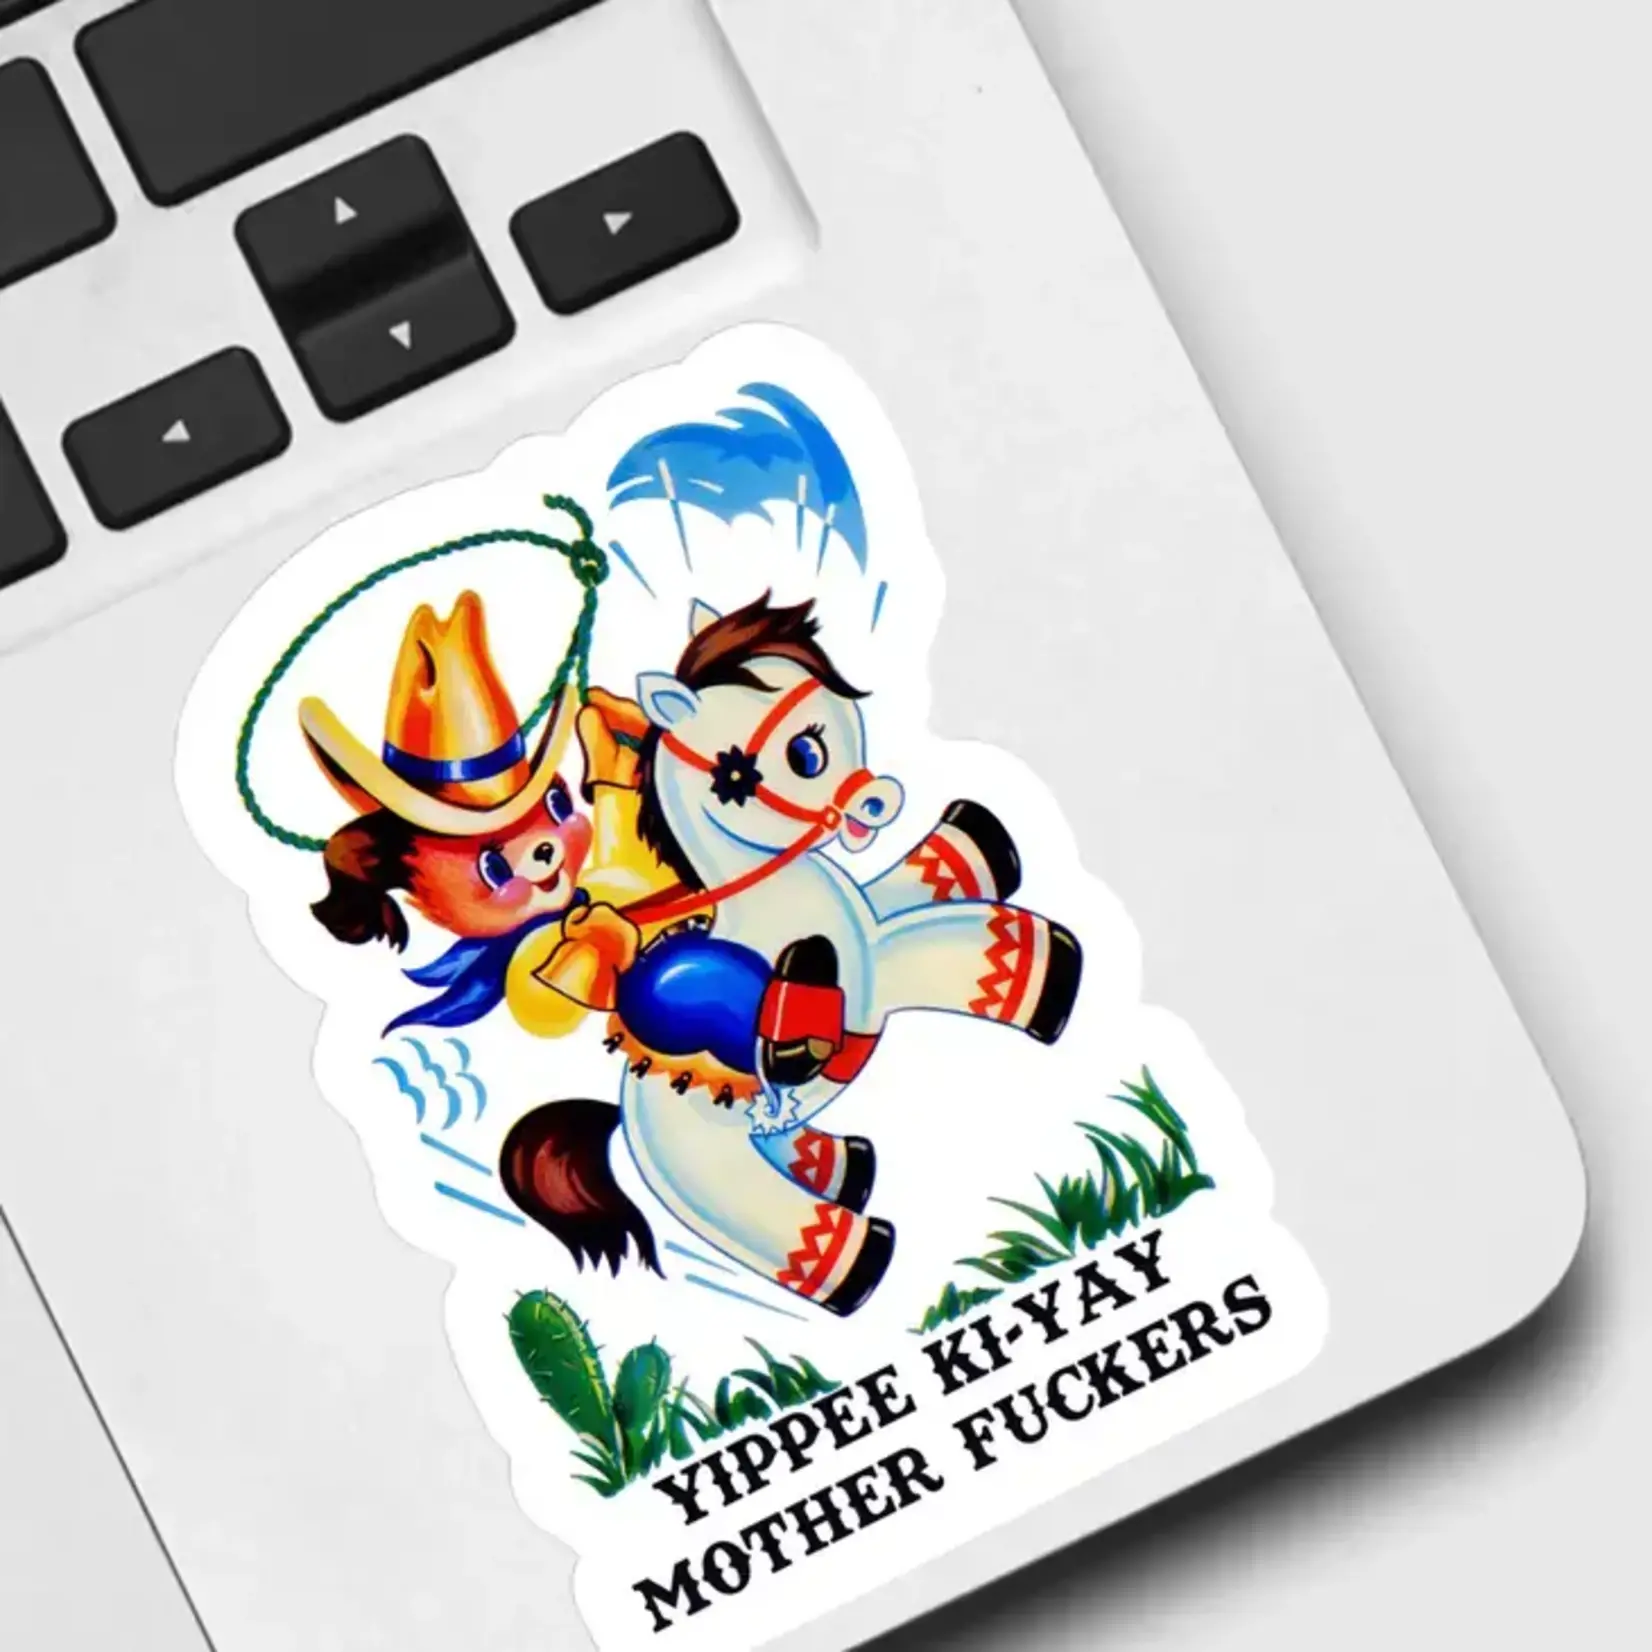 Ace the Pitmatian Co Yippee Ki-yay Mother F*ckers Sticker